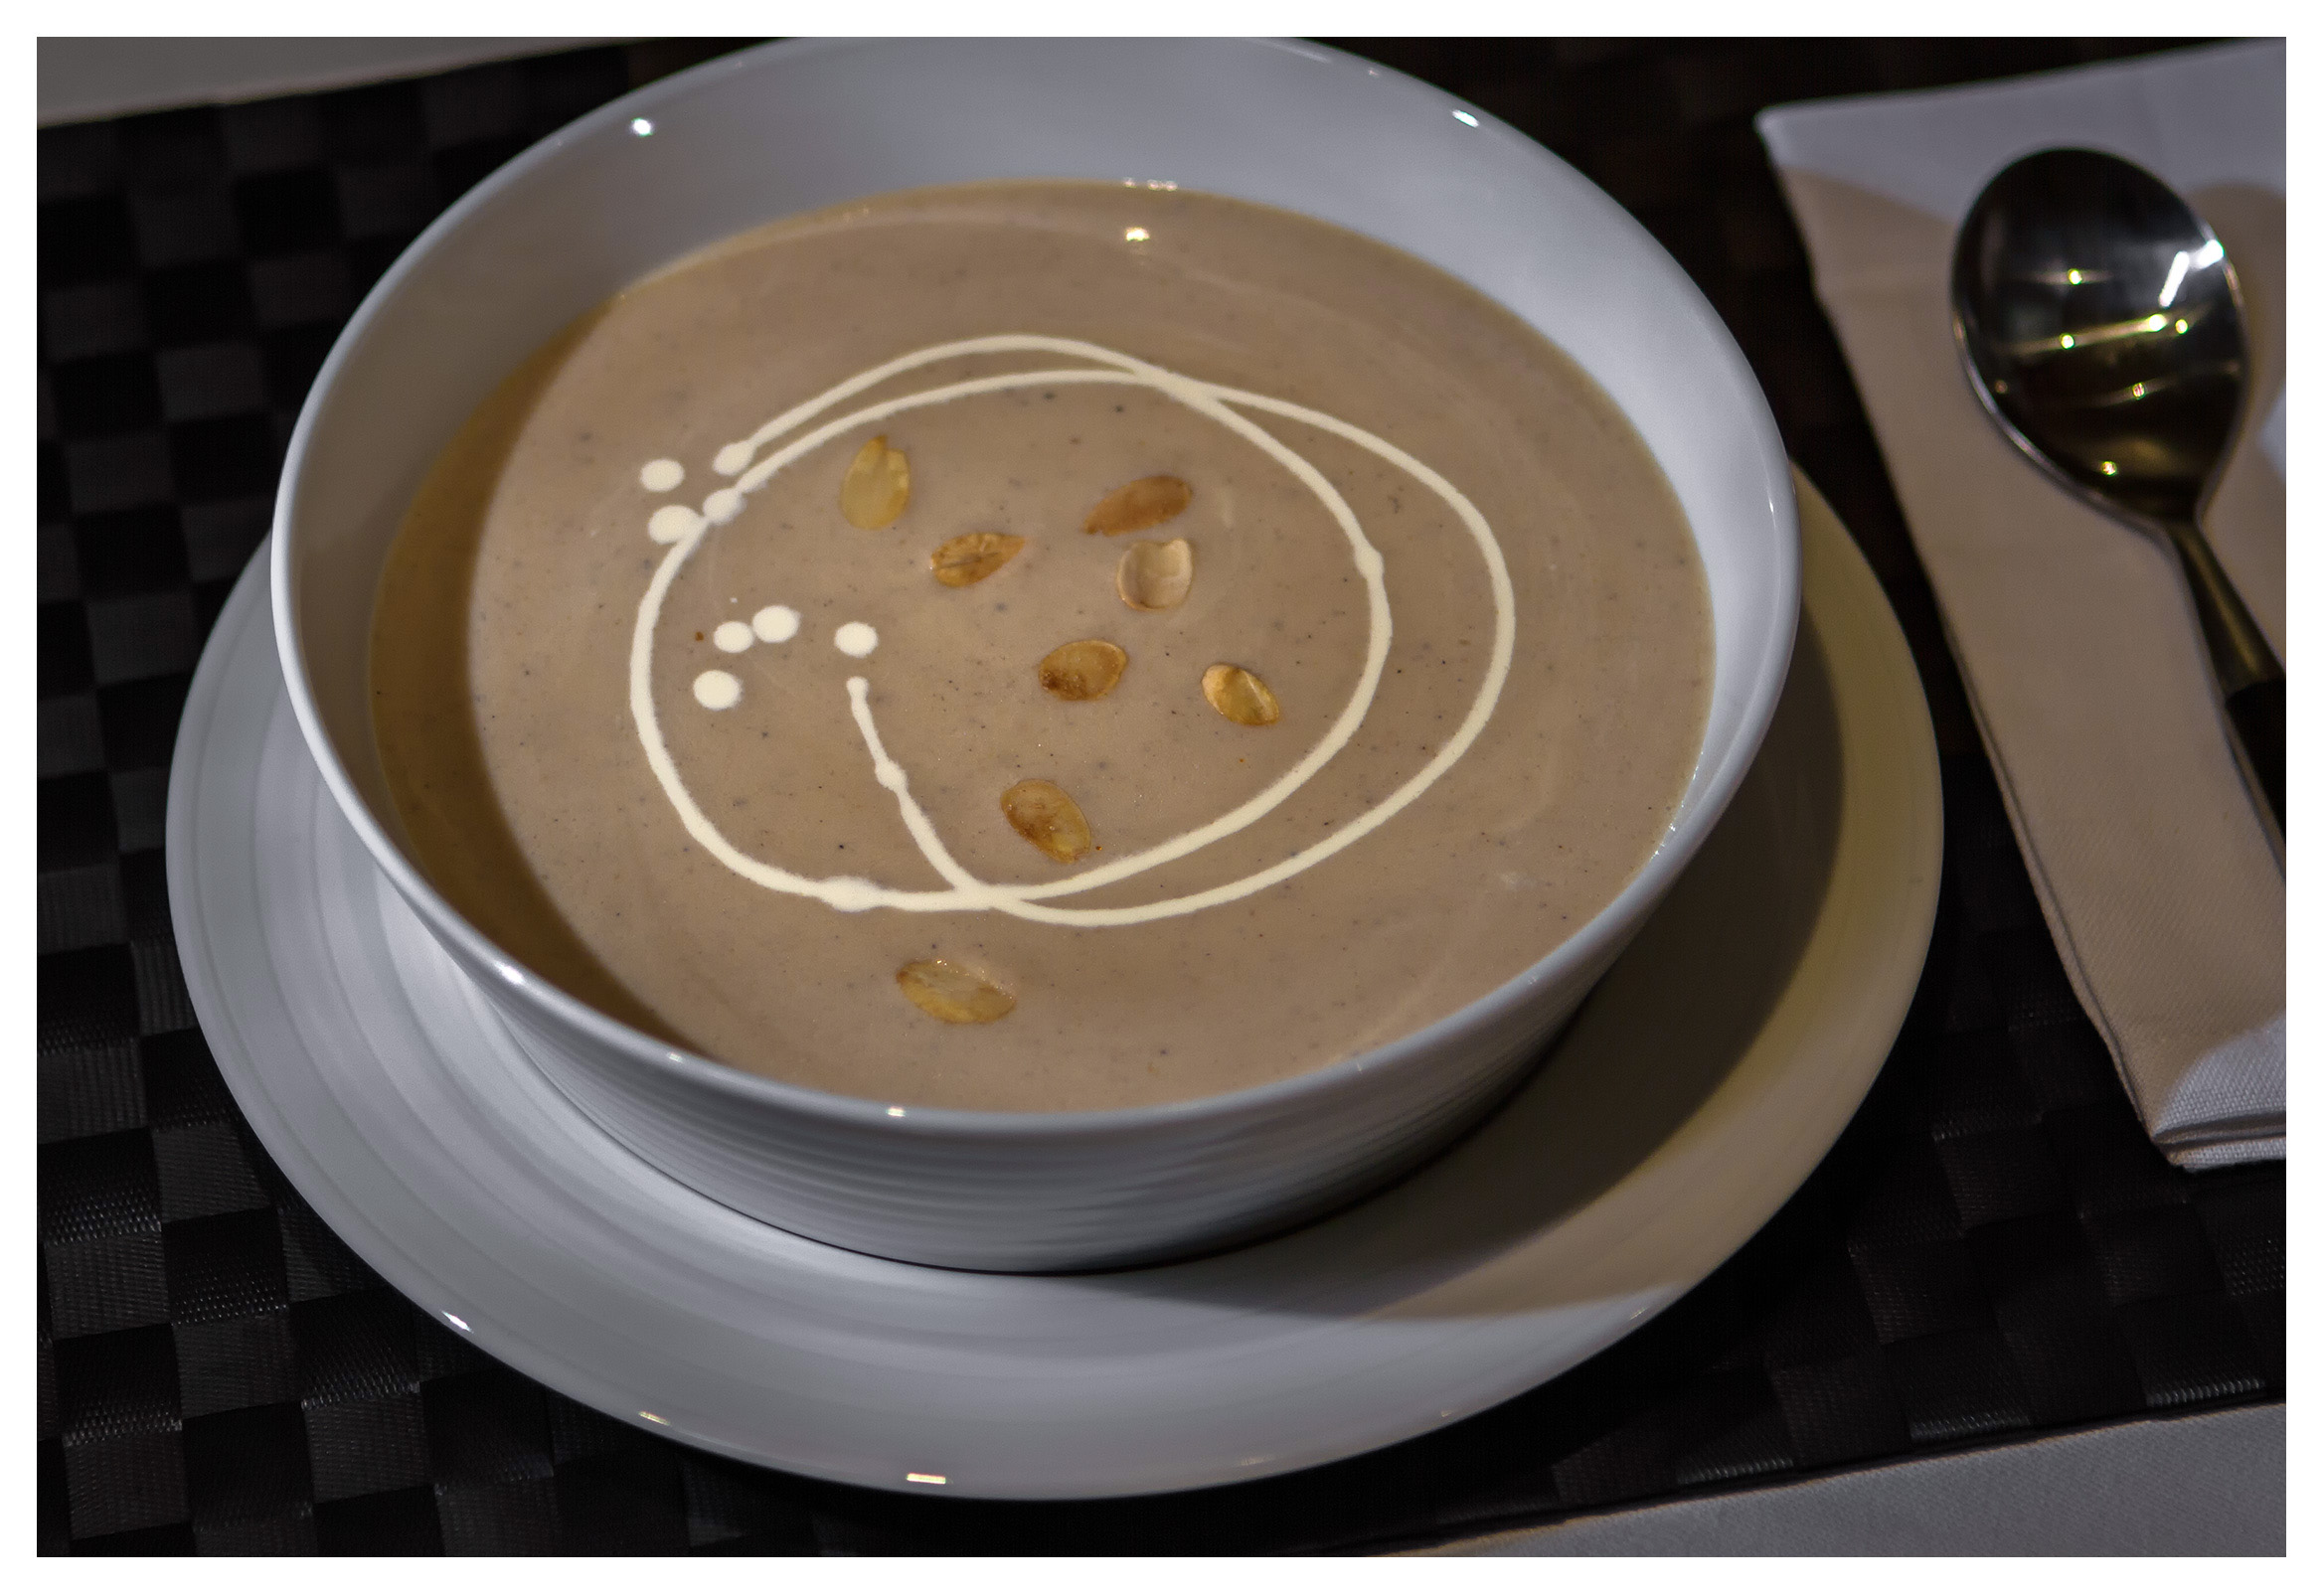 Restaurant food photography: Cauliflower and almond soup 